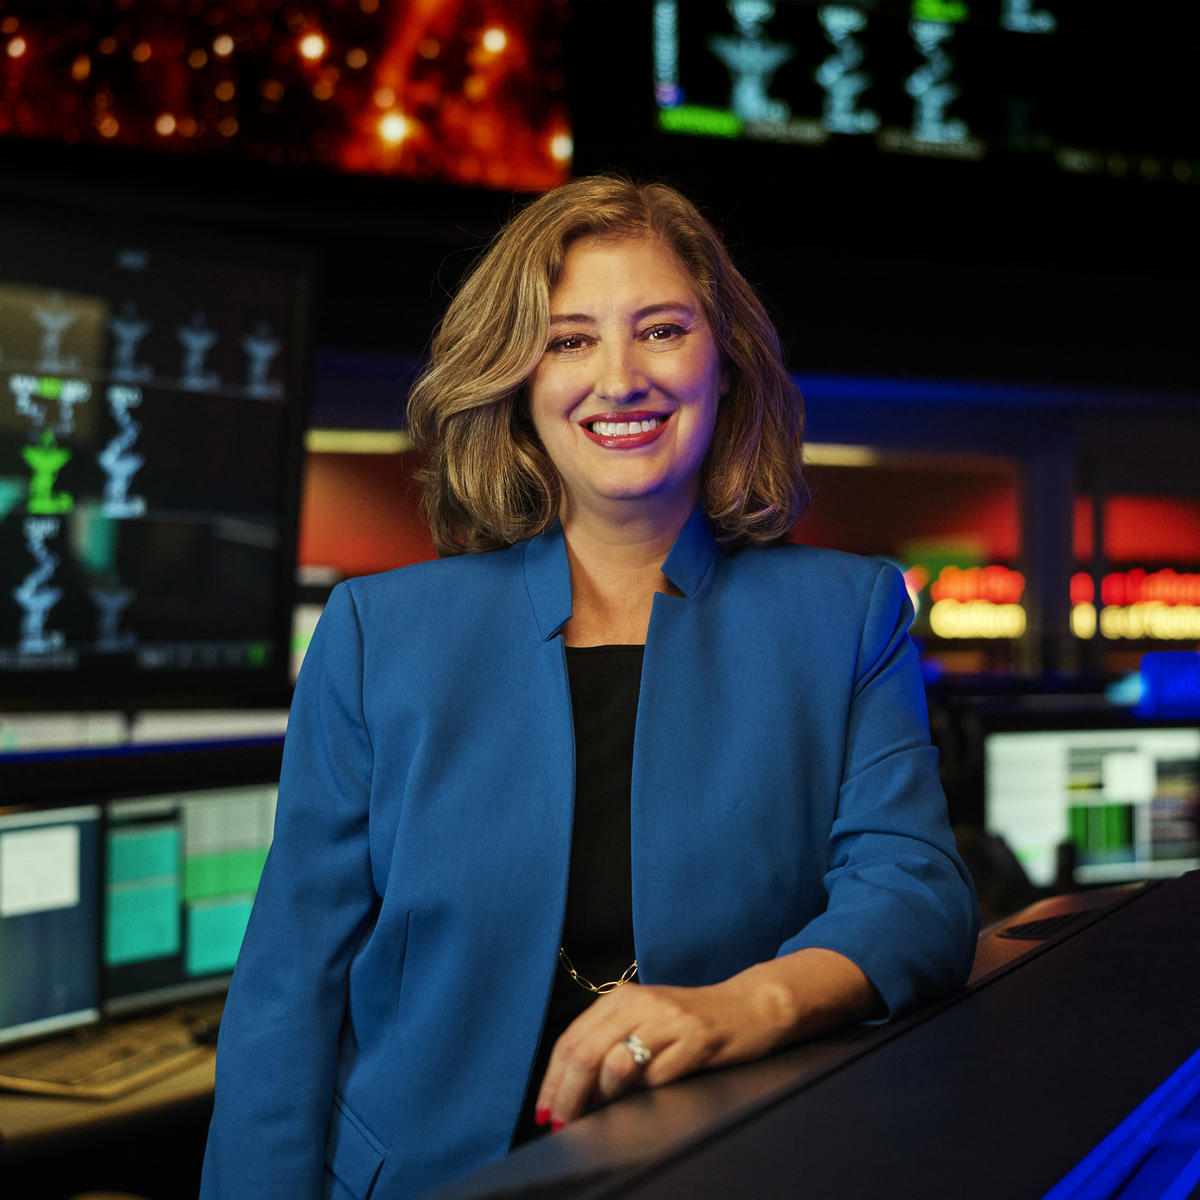 We're over the 🌙 to announce our 178th Commencement speaker! Meet Dr. Laurie Leshin, space scientist, #geochemist, and trailblazer for #womeninscience. From leading @NASAJPL to presiding over @WPI, get ready to be inspired 🚀 #Commencement2024 bit.ly/3xdeiH1